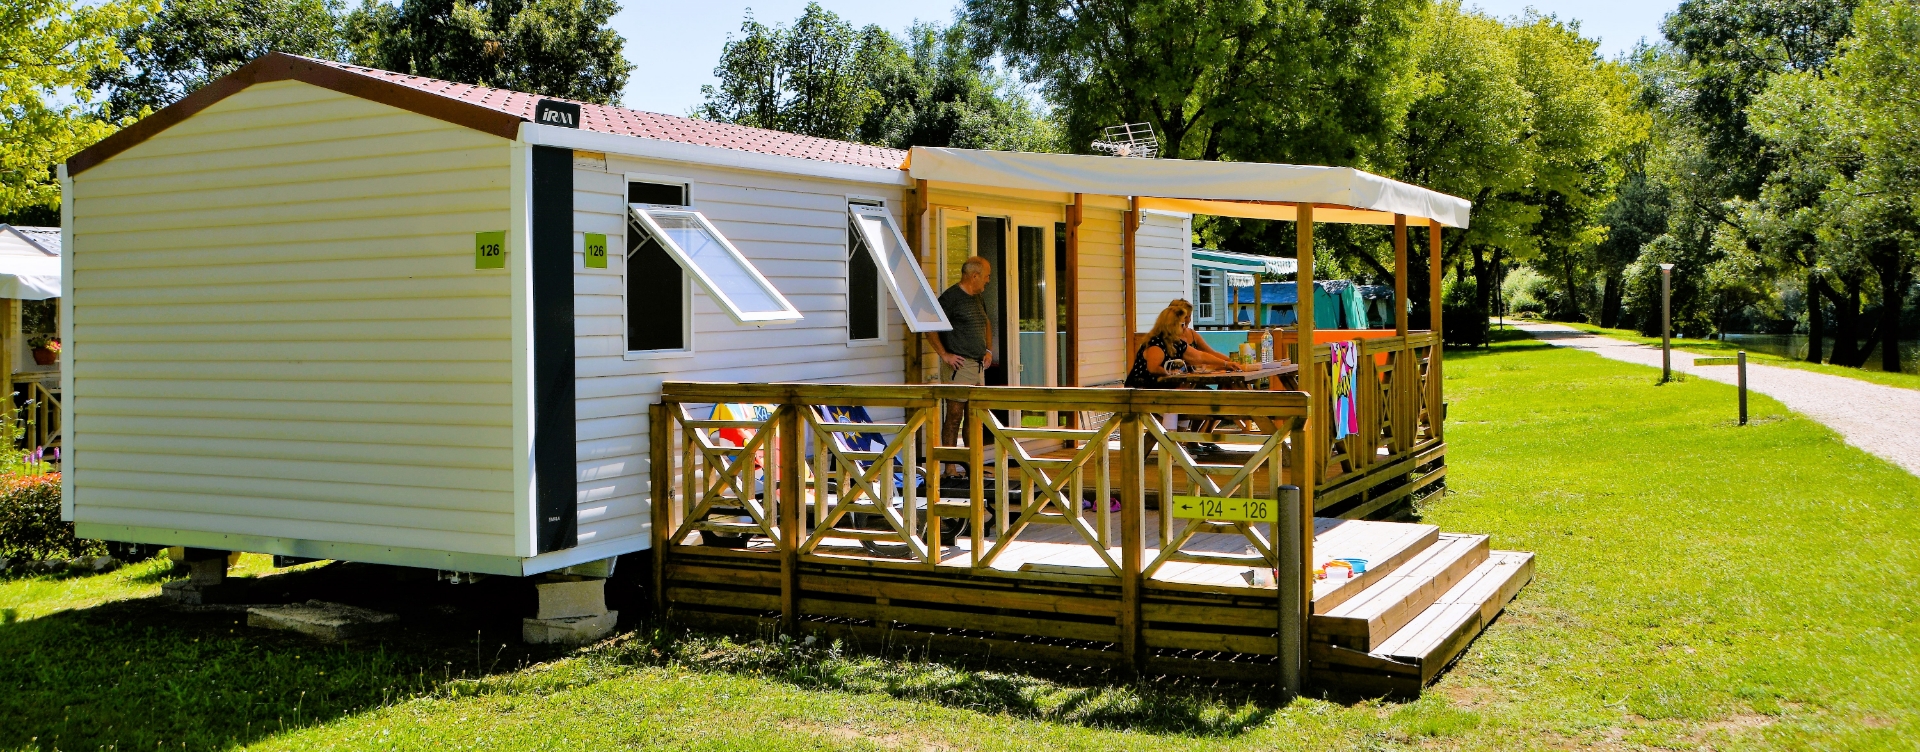 Accommodation in a mobile home in Jura, with wood terrace